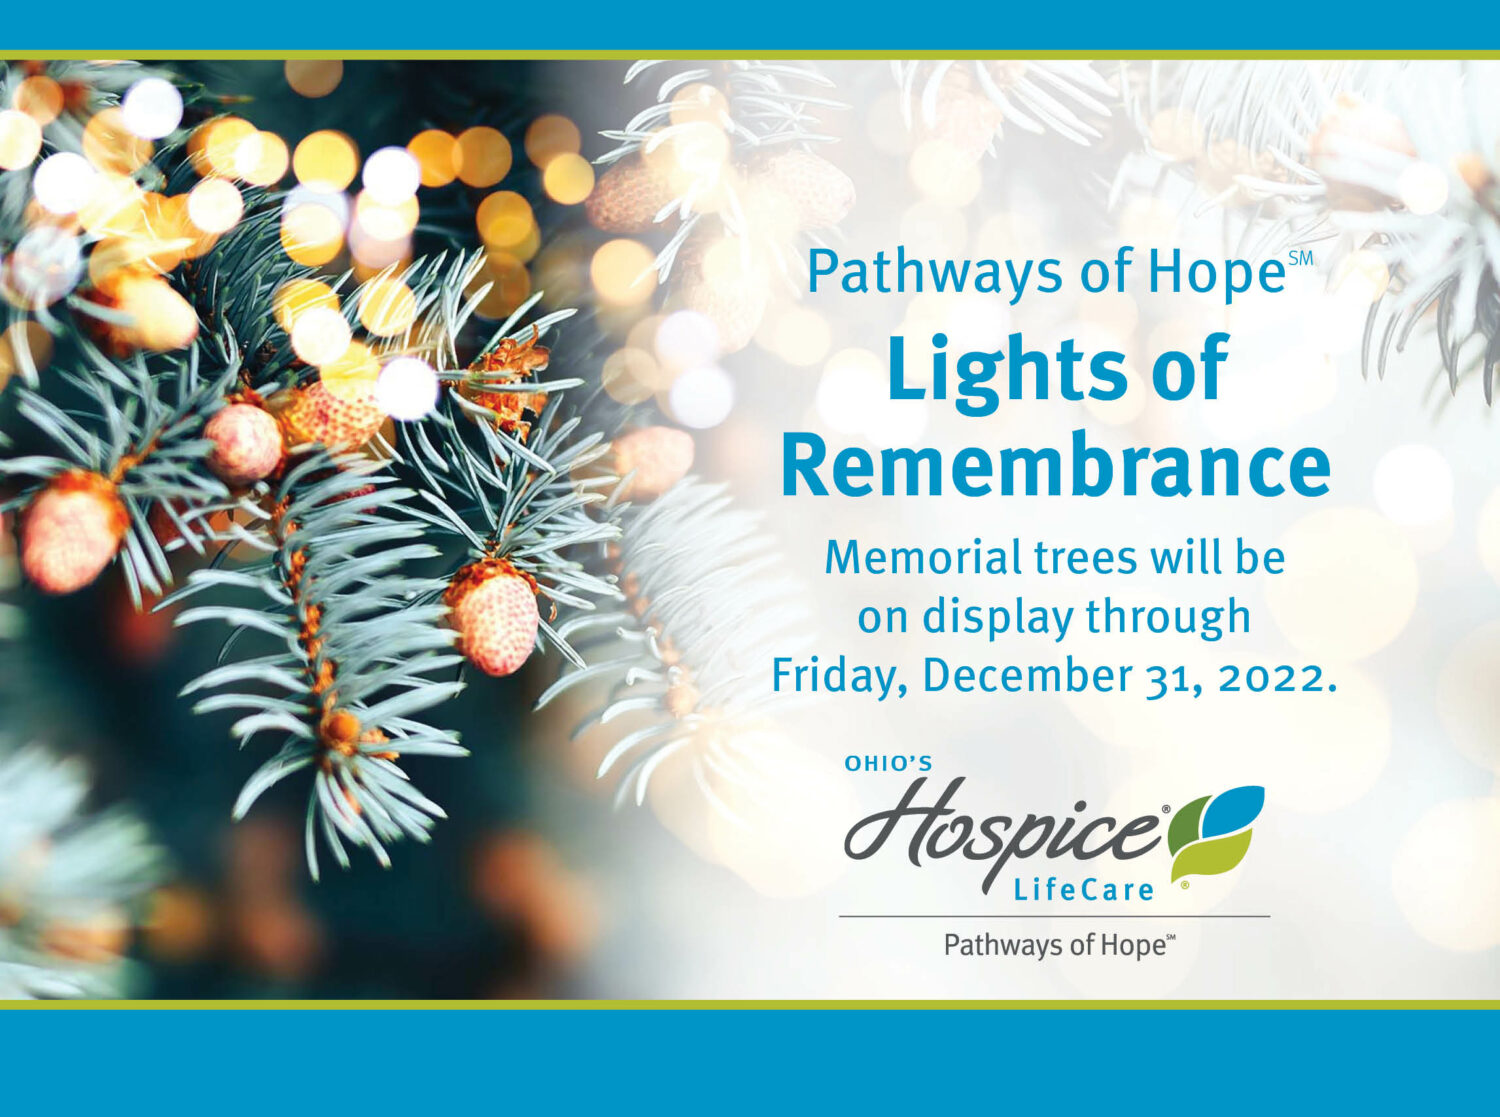 Pathways of Hope Lights of Remembrance: Memorial trees will be on display through Friday, December 31, 2022.